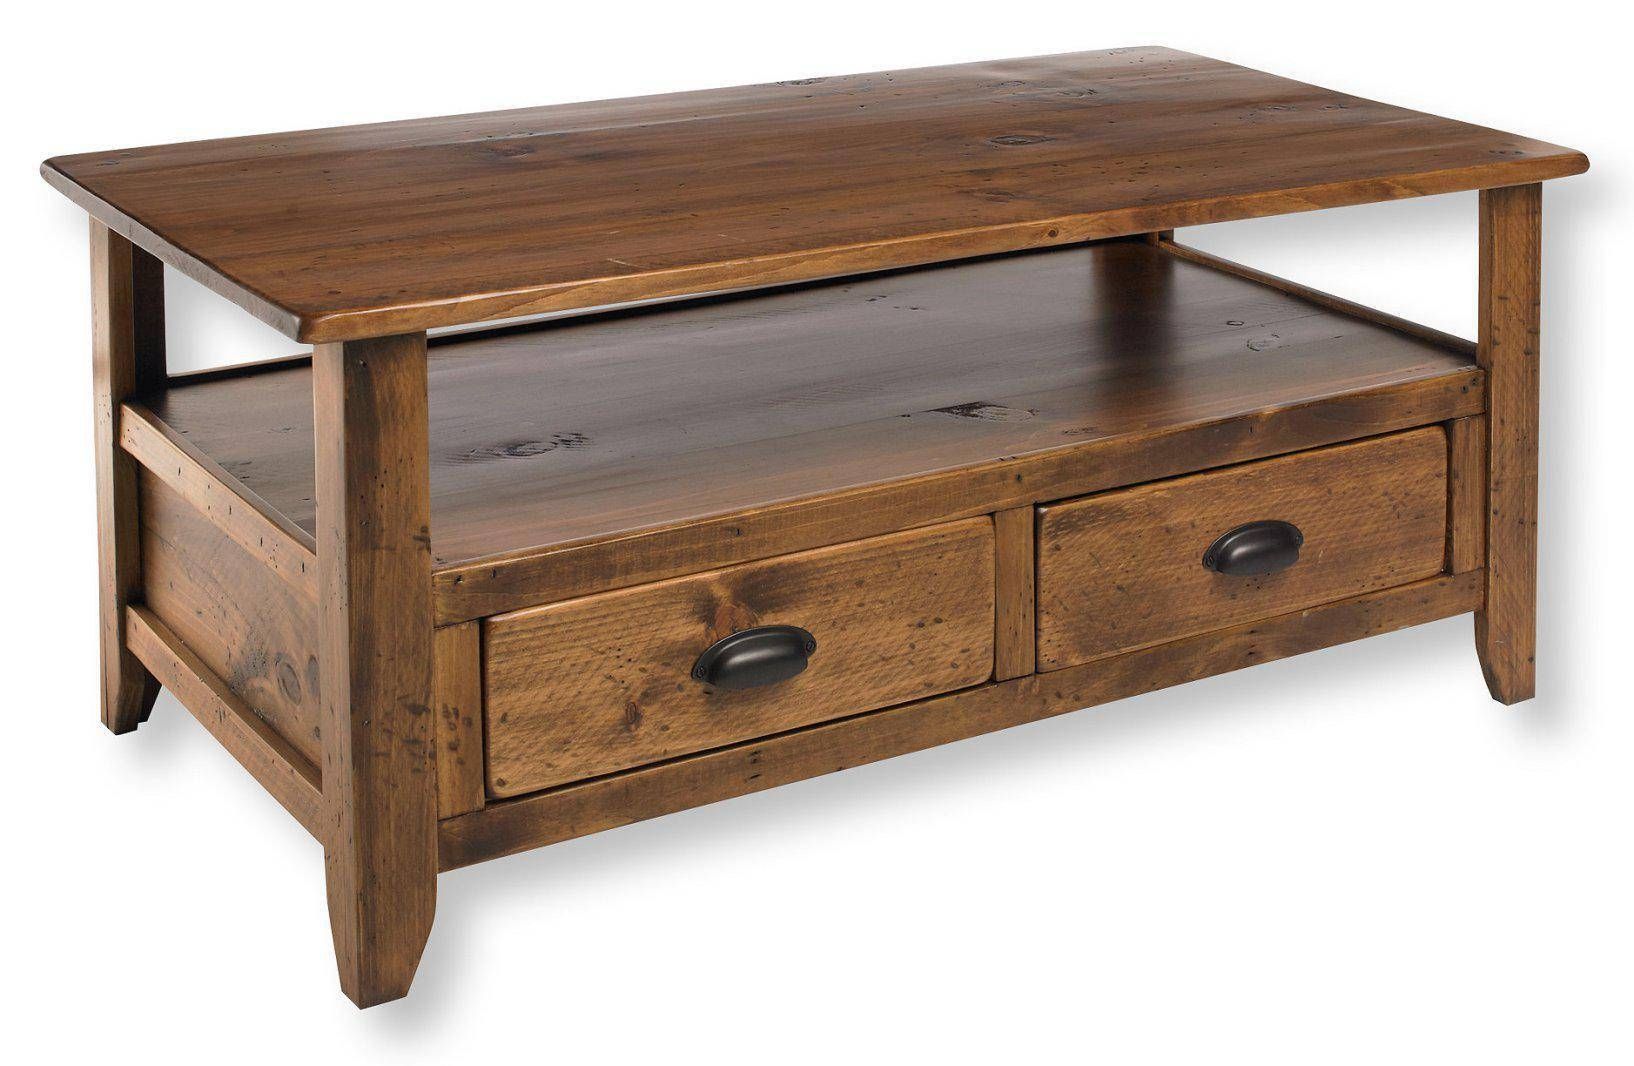 Unique Rustic Wood Coffee Table – Rustic Accent Tables, Rustic Throughout Wooden Storage Coffee Tables (View 6 of 30)